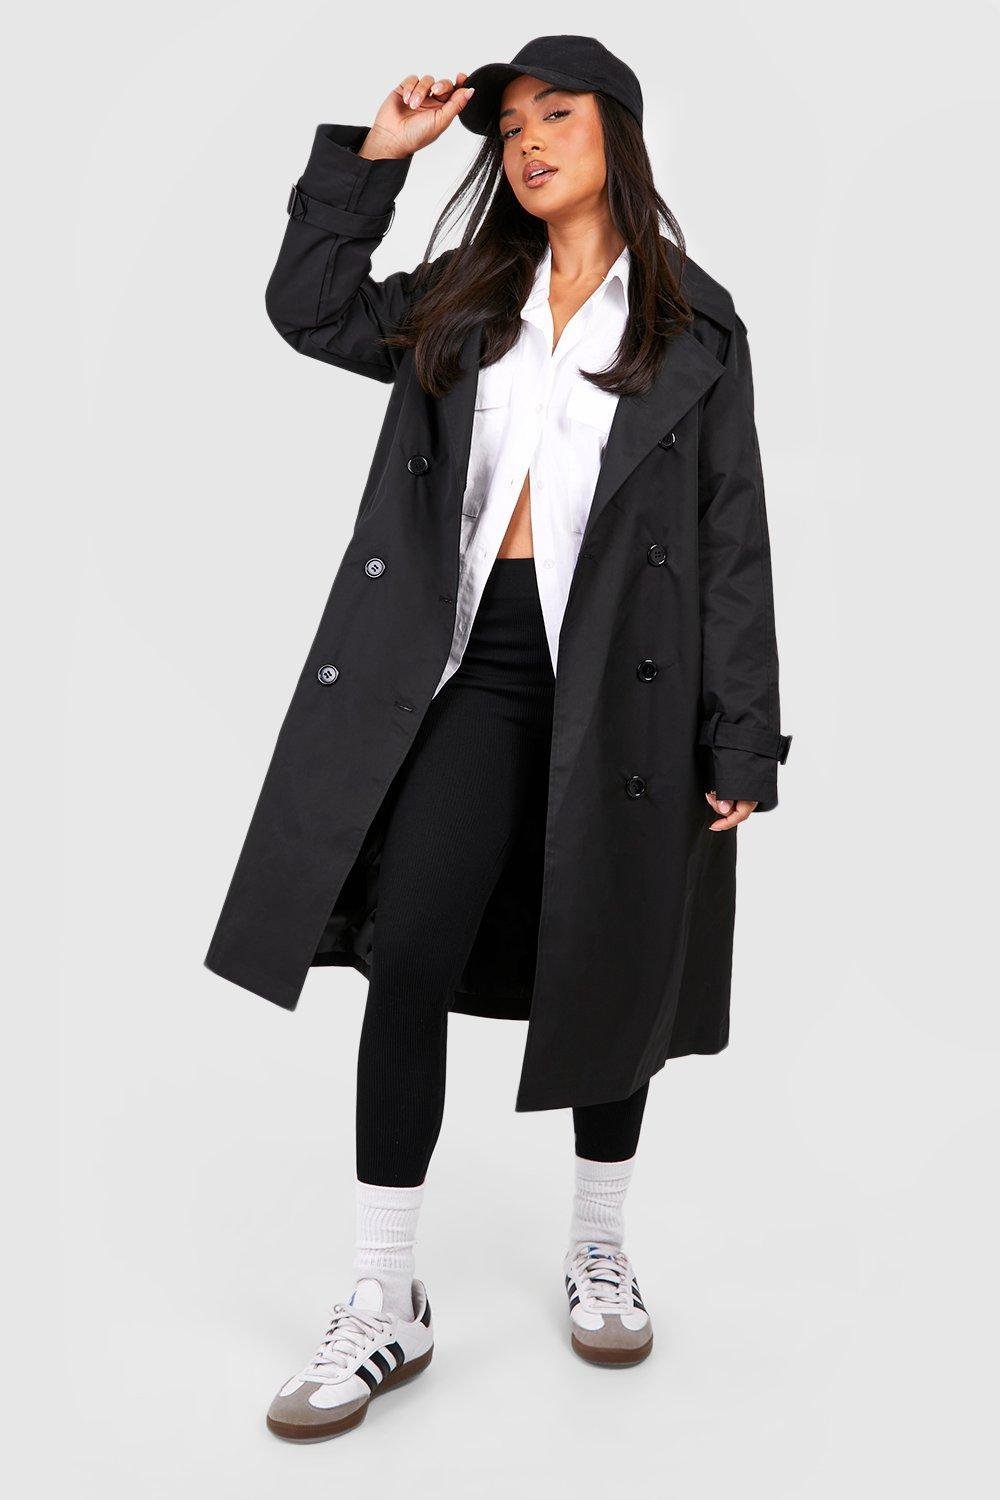 Boohoo Petite Double Breast Belted Trench Coat in Black | Lyst UK